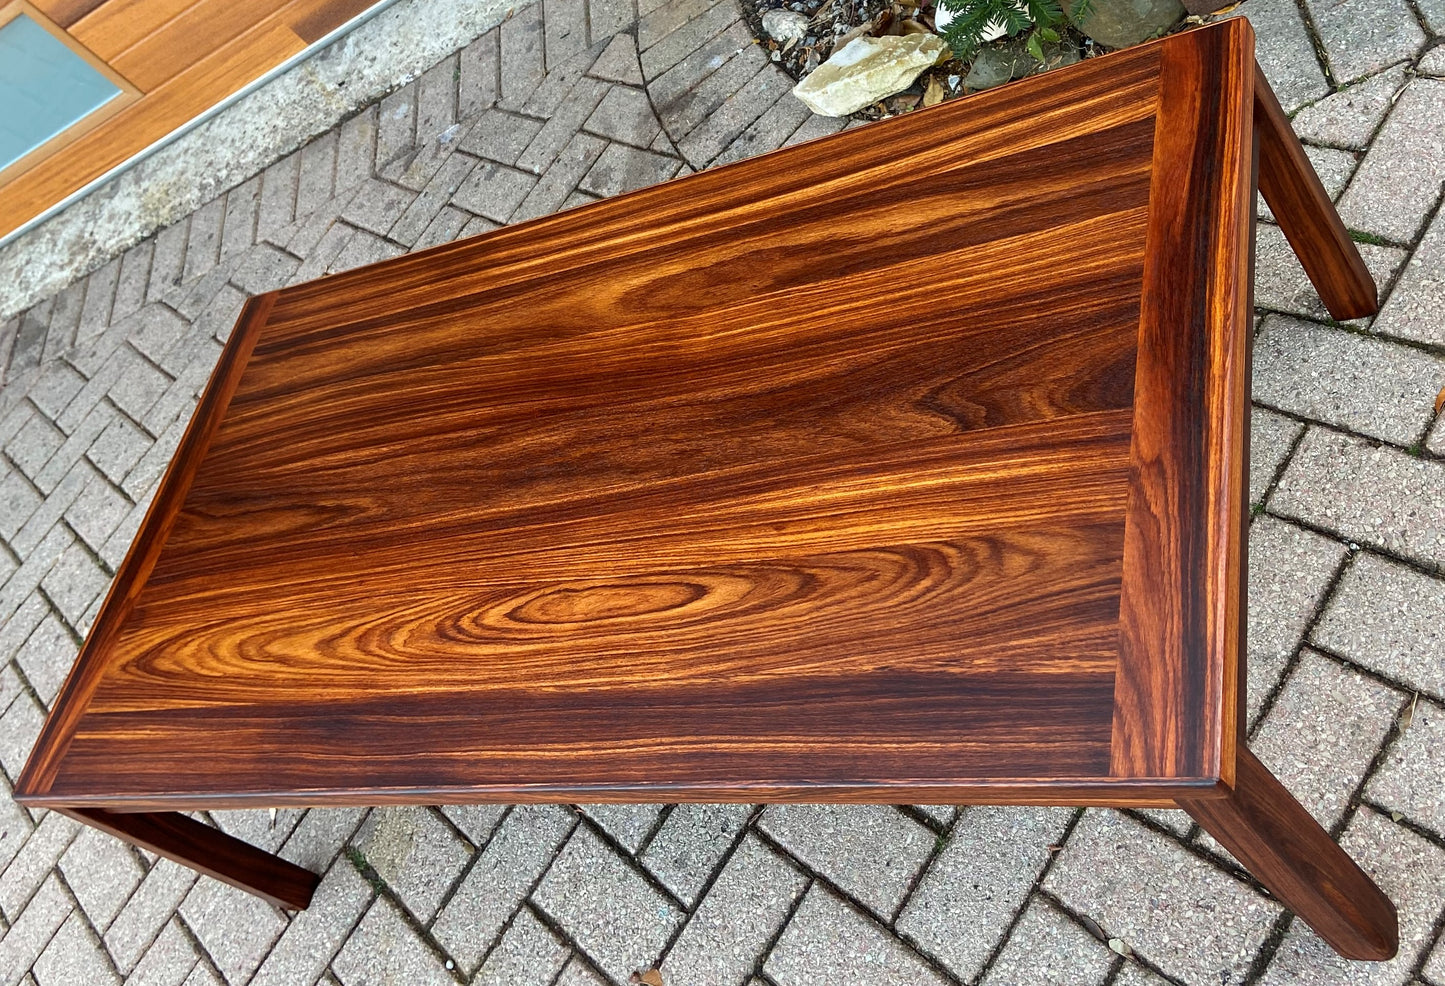 REFINISHED Danish Mid Century Modern Rosewood Coffee Table, PERFECT